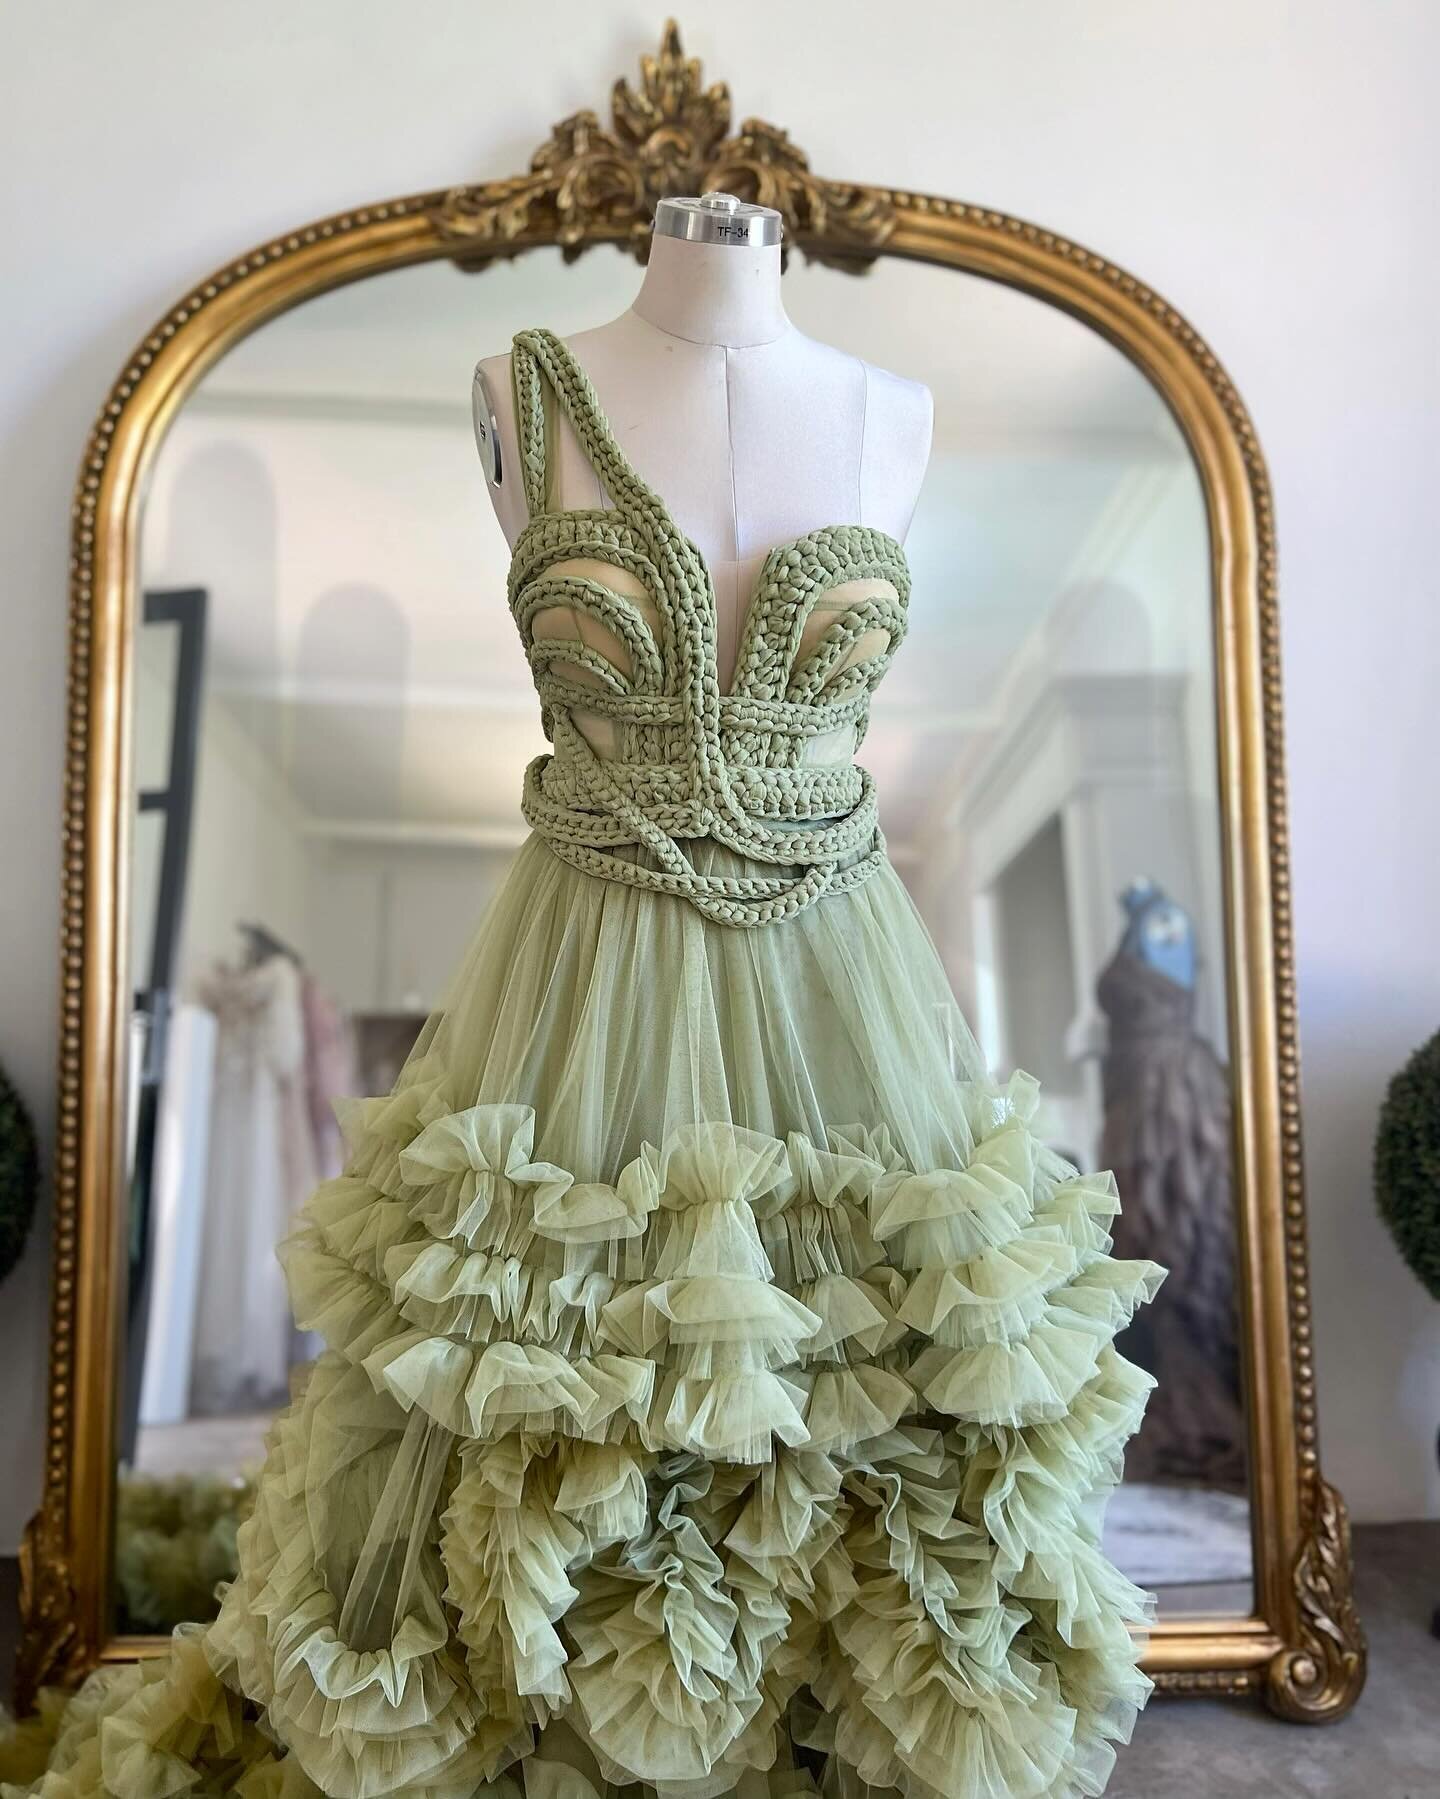 Cascades of green&hellip;

Did you know that the detail on the corset is made up of 10 meters of tulle fabric hand cut into strips becoming roughly 260 meters of tulle &ldquo;yarn&rdquo; , then crocheted into different textures before placed and sewe